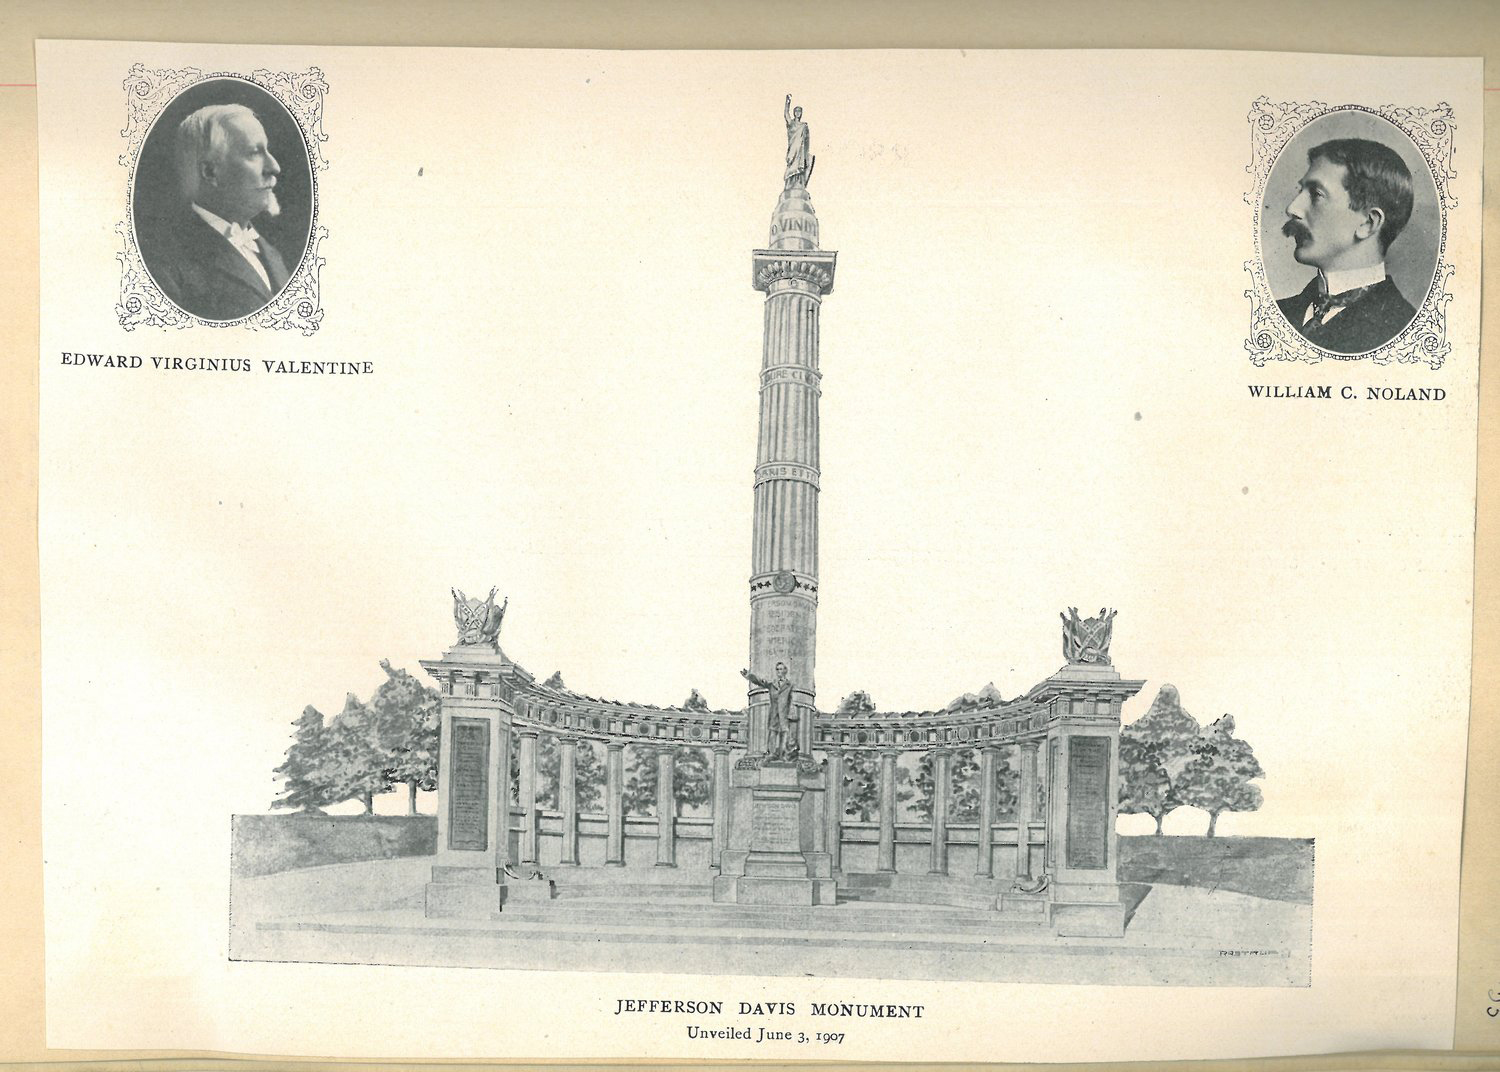 A print of the Jefferson Davis monument in Richmond, Virginia. The full monument consists of a statue to Davis with a large column behind him. Atop the column stands “Miss Confederacy.” Fanning out in an arc at the base of the column is a neoclassical structure. Side portraits of Edward Valentine (left) and William Noland (right) are next to the monument drawing.